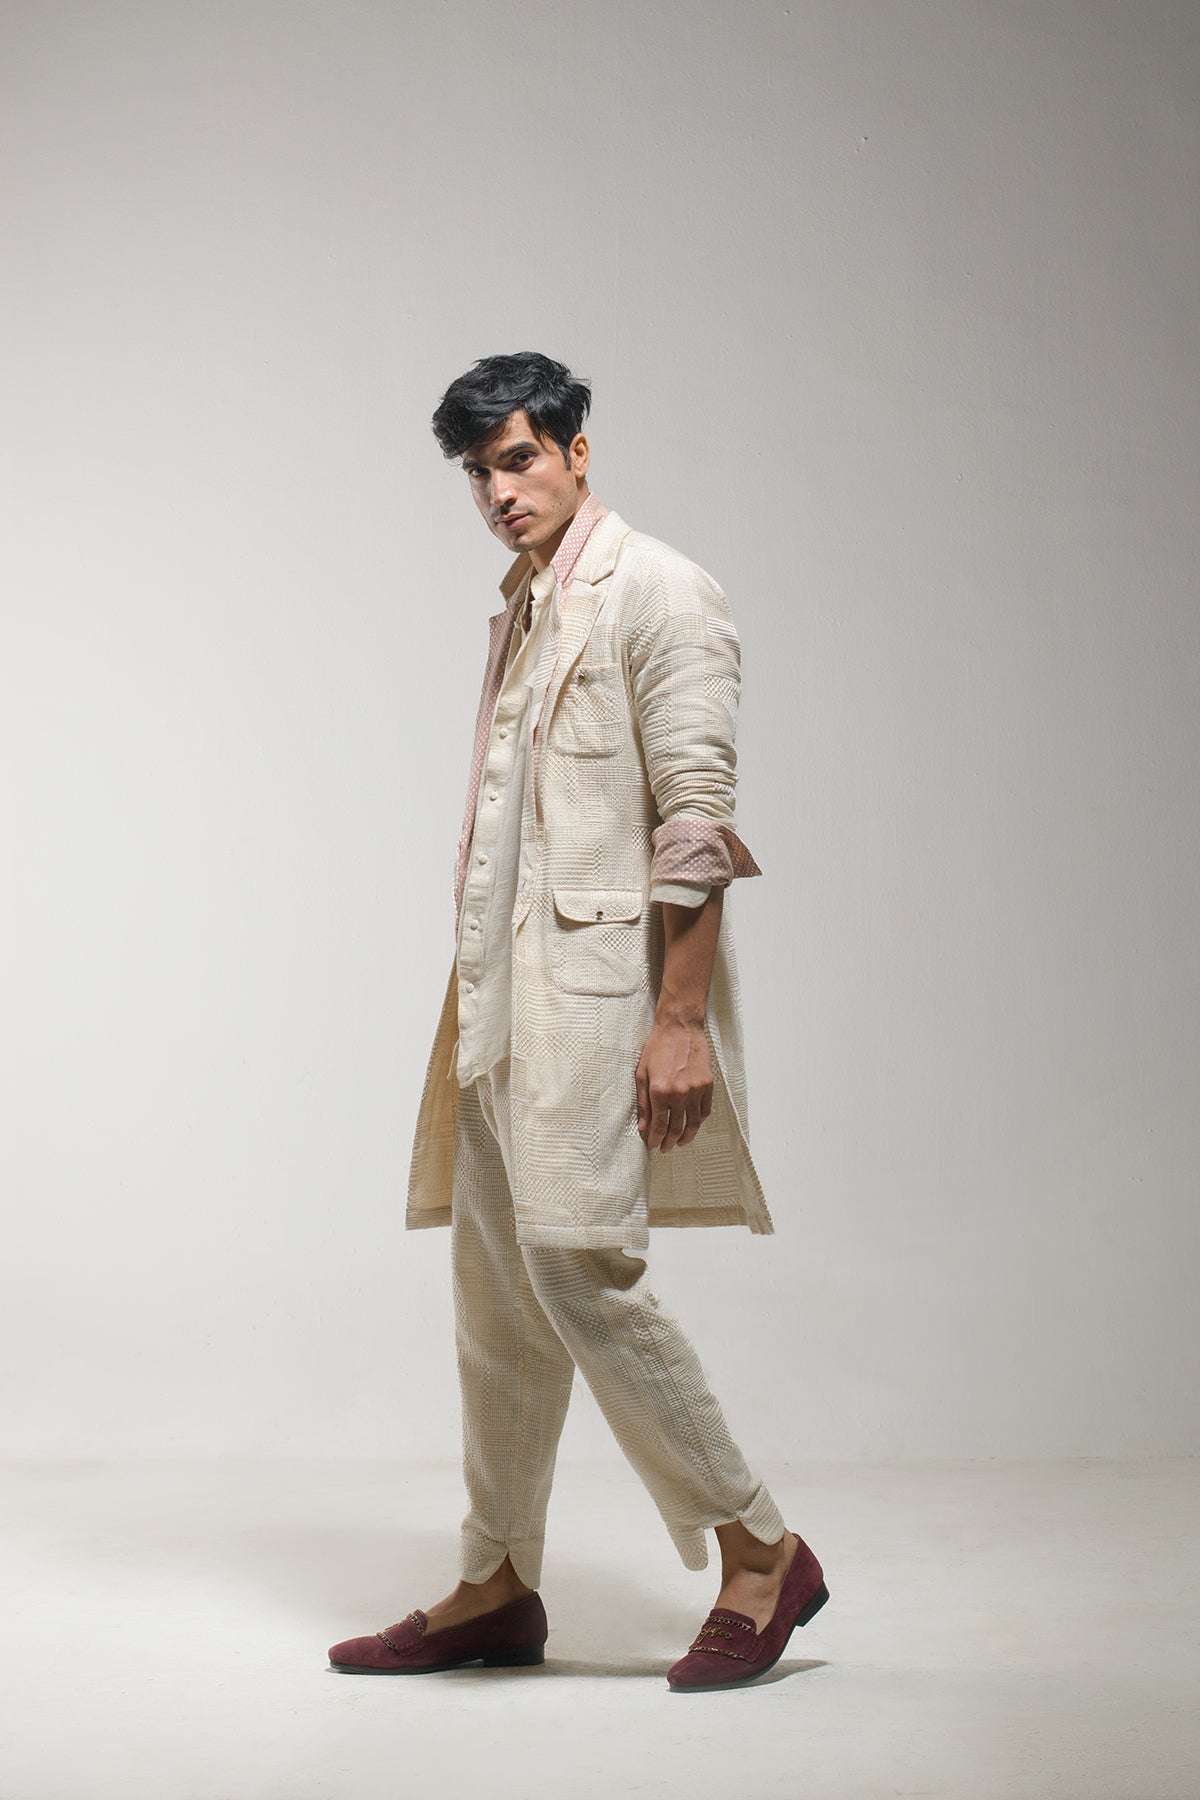 Wrap yourself in sophistication with our Beige Overcoat.